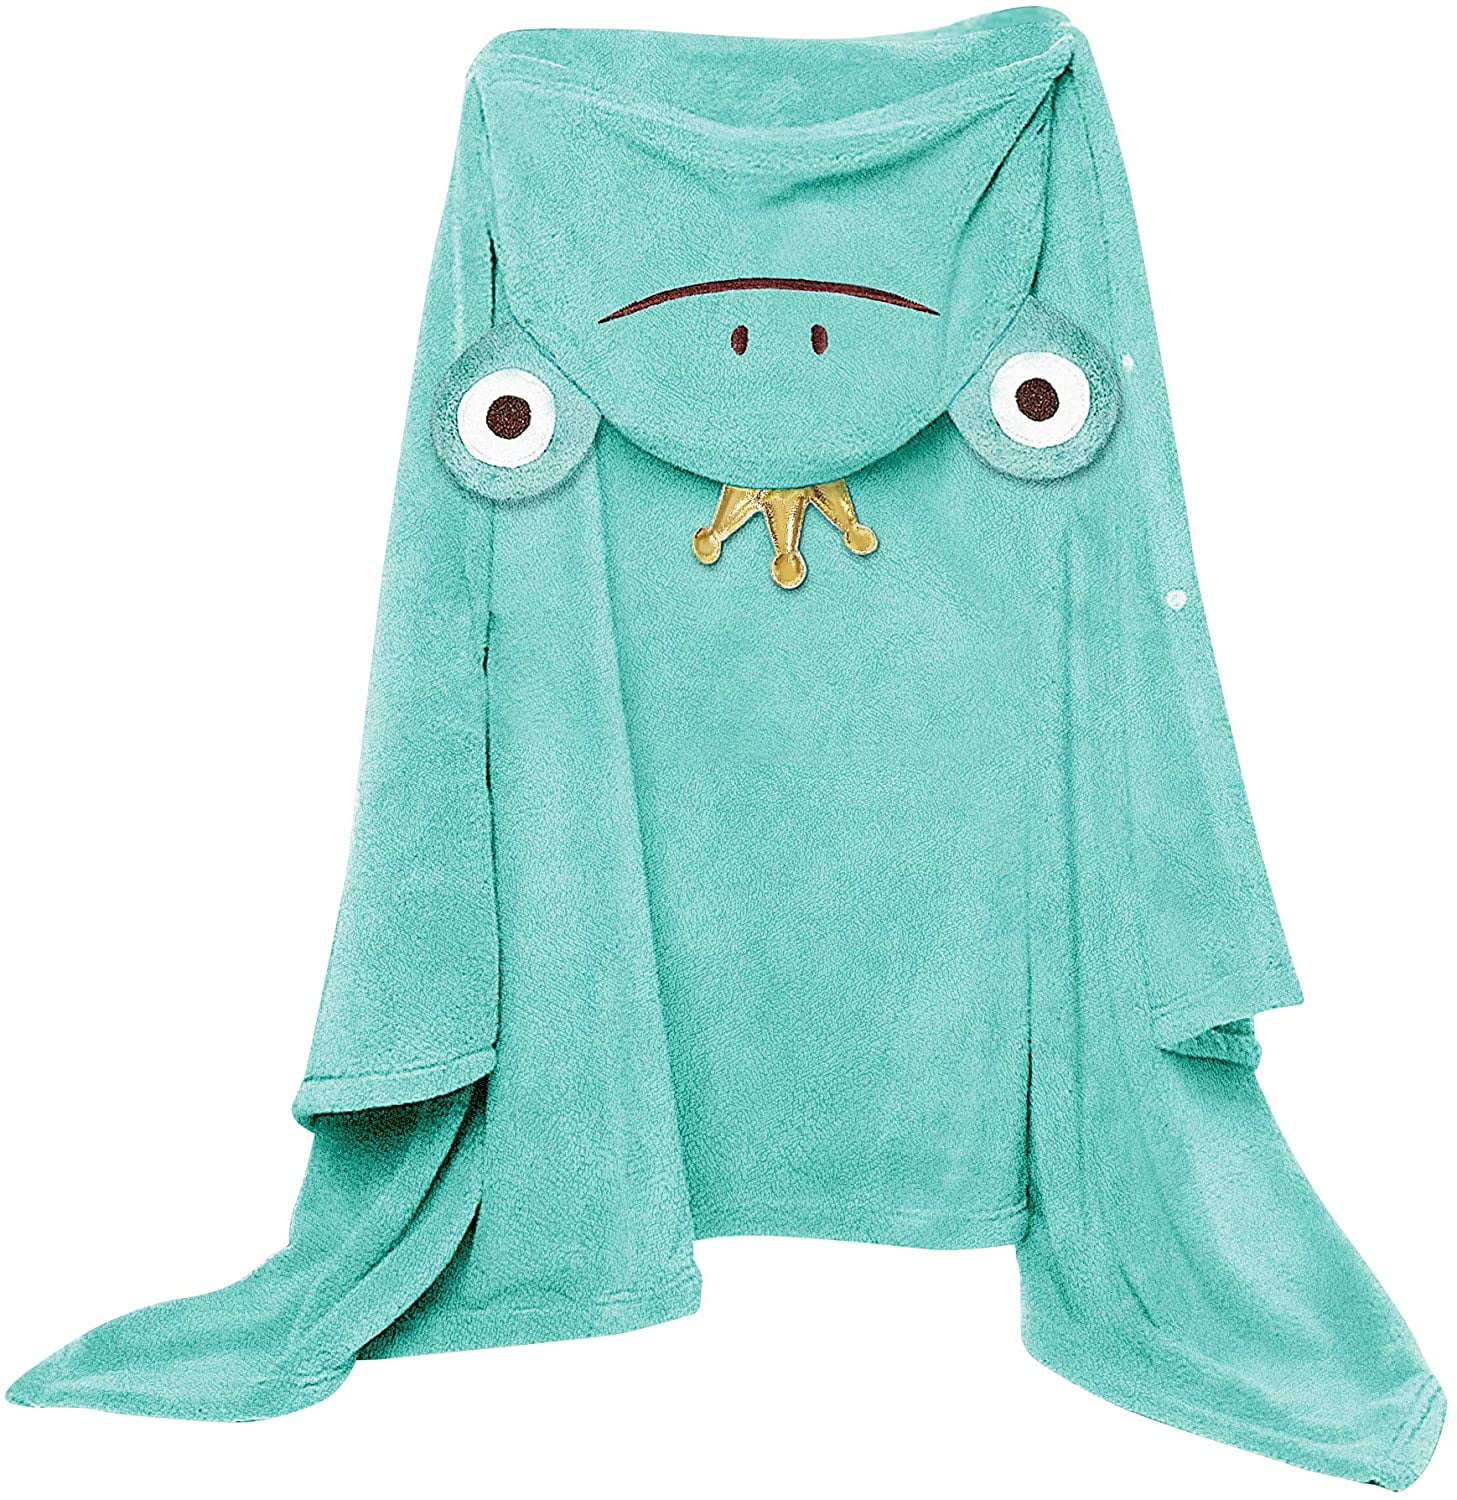 Frog Green Kids Bath Towels-Unisex Toddlers Absorbent Ultra Soft Premium Hooded Baby Towel Cotton Animal Face Beach Swimming Towel 55 x 27.5'' 